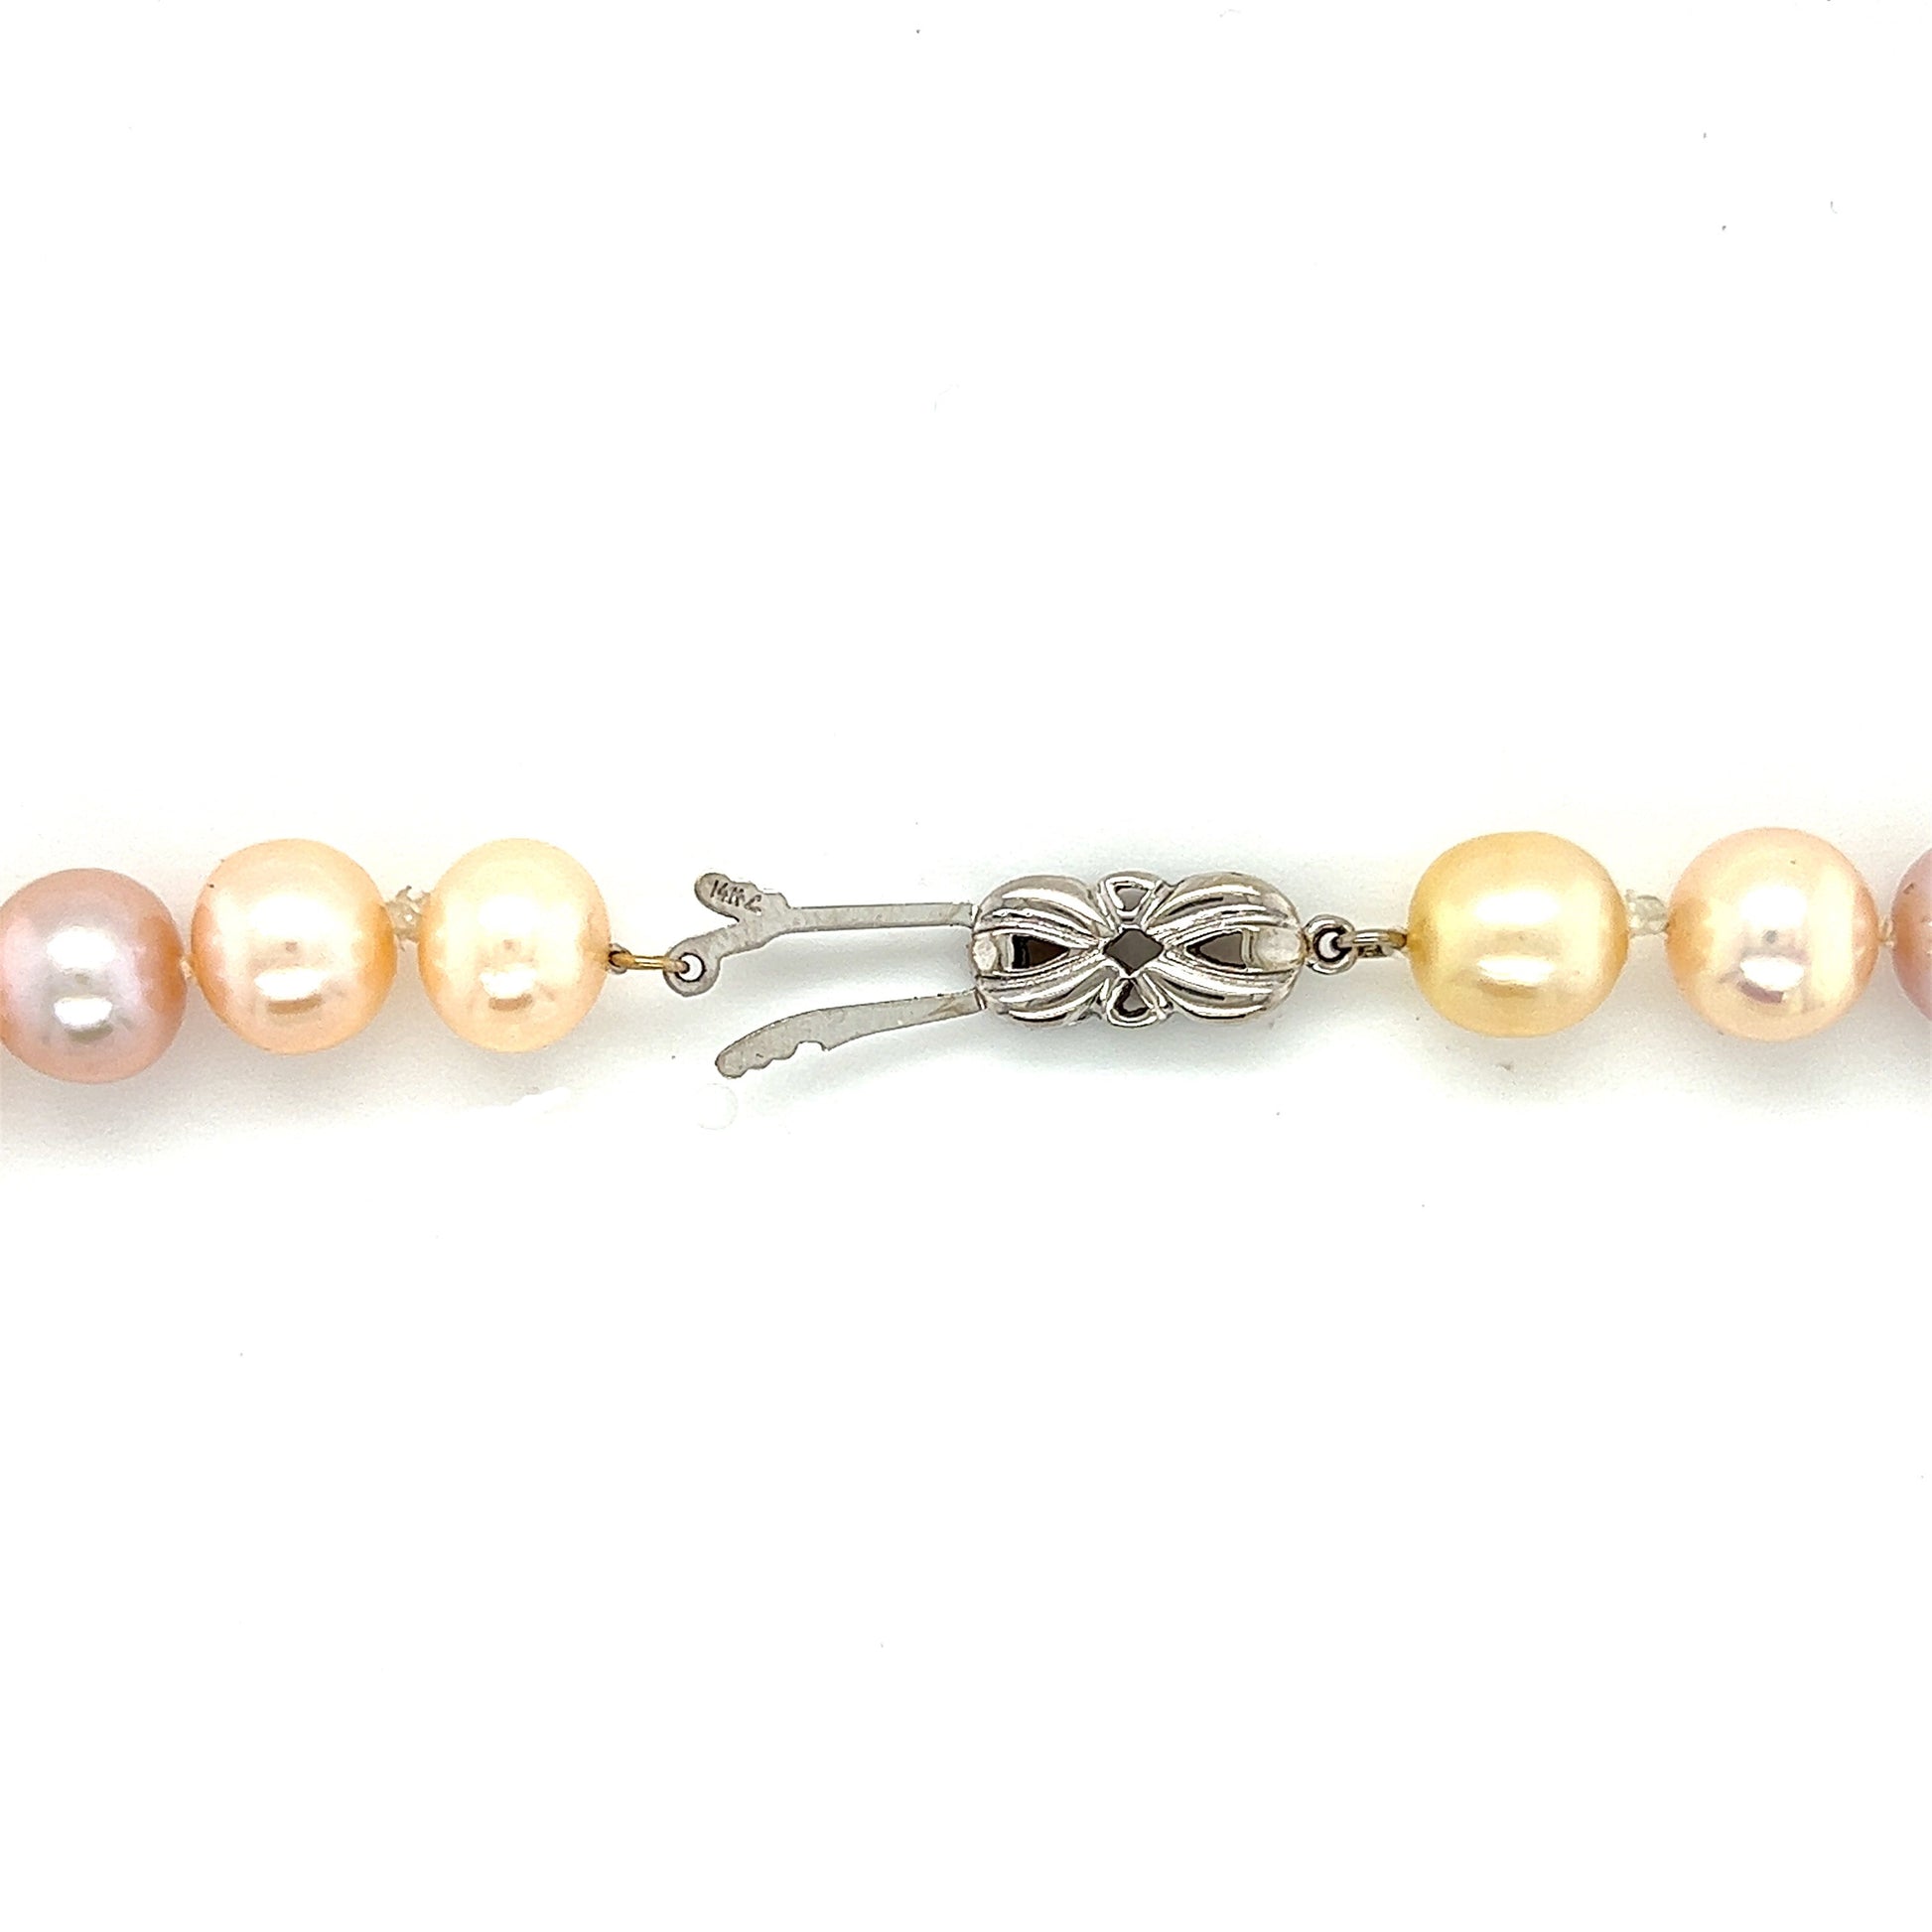 Multicolor Pearl Necklace with Forty-Seven 9.5mm Pearls and 14K White Gold Catch. Catch View